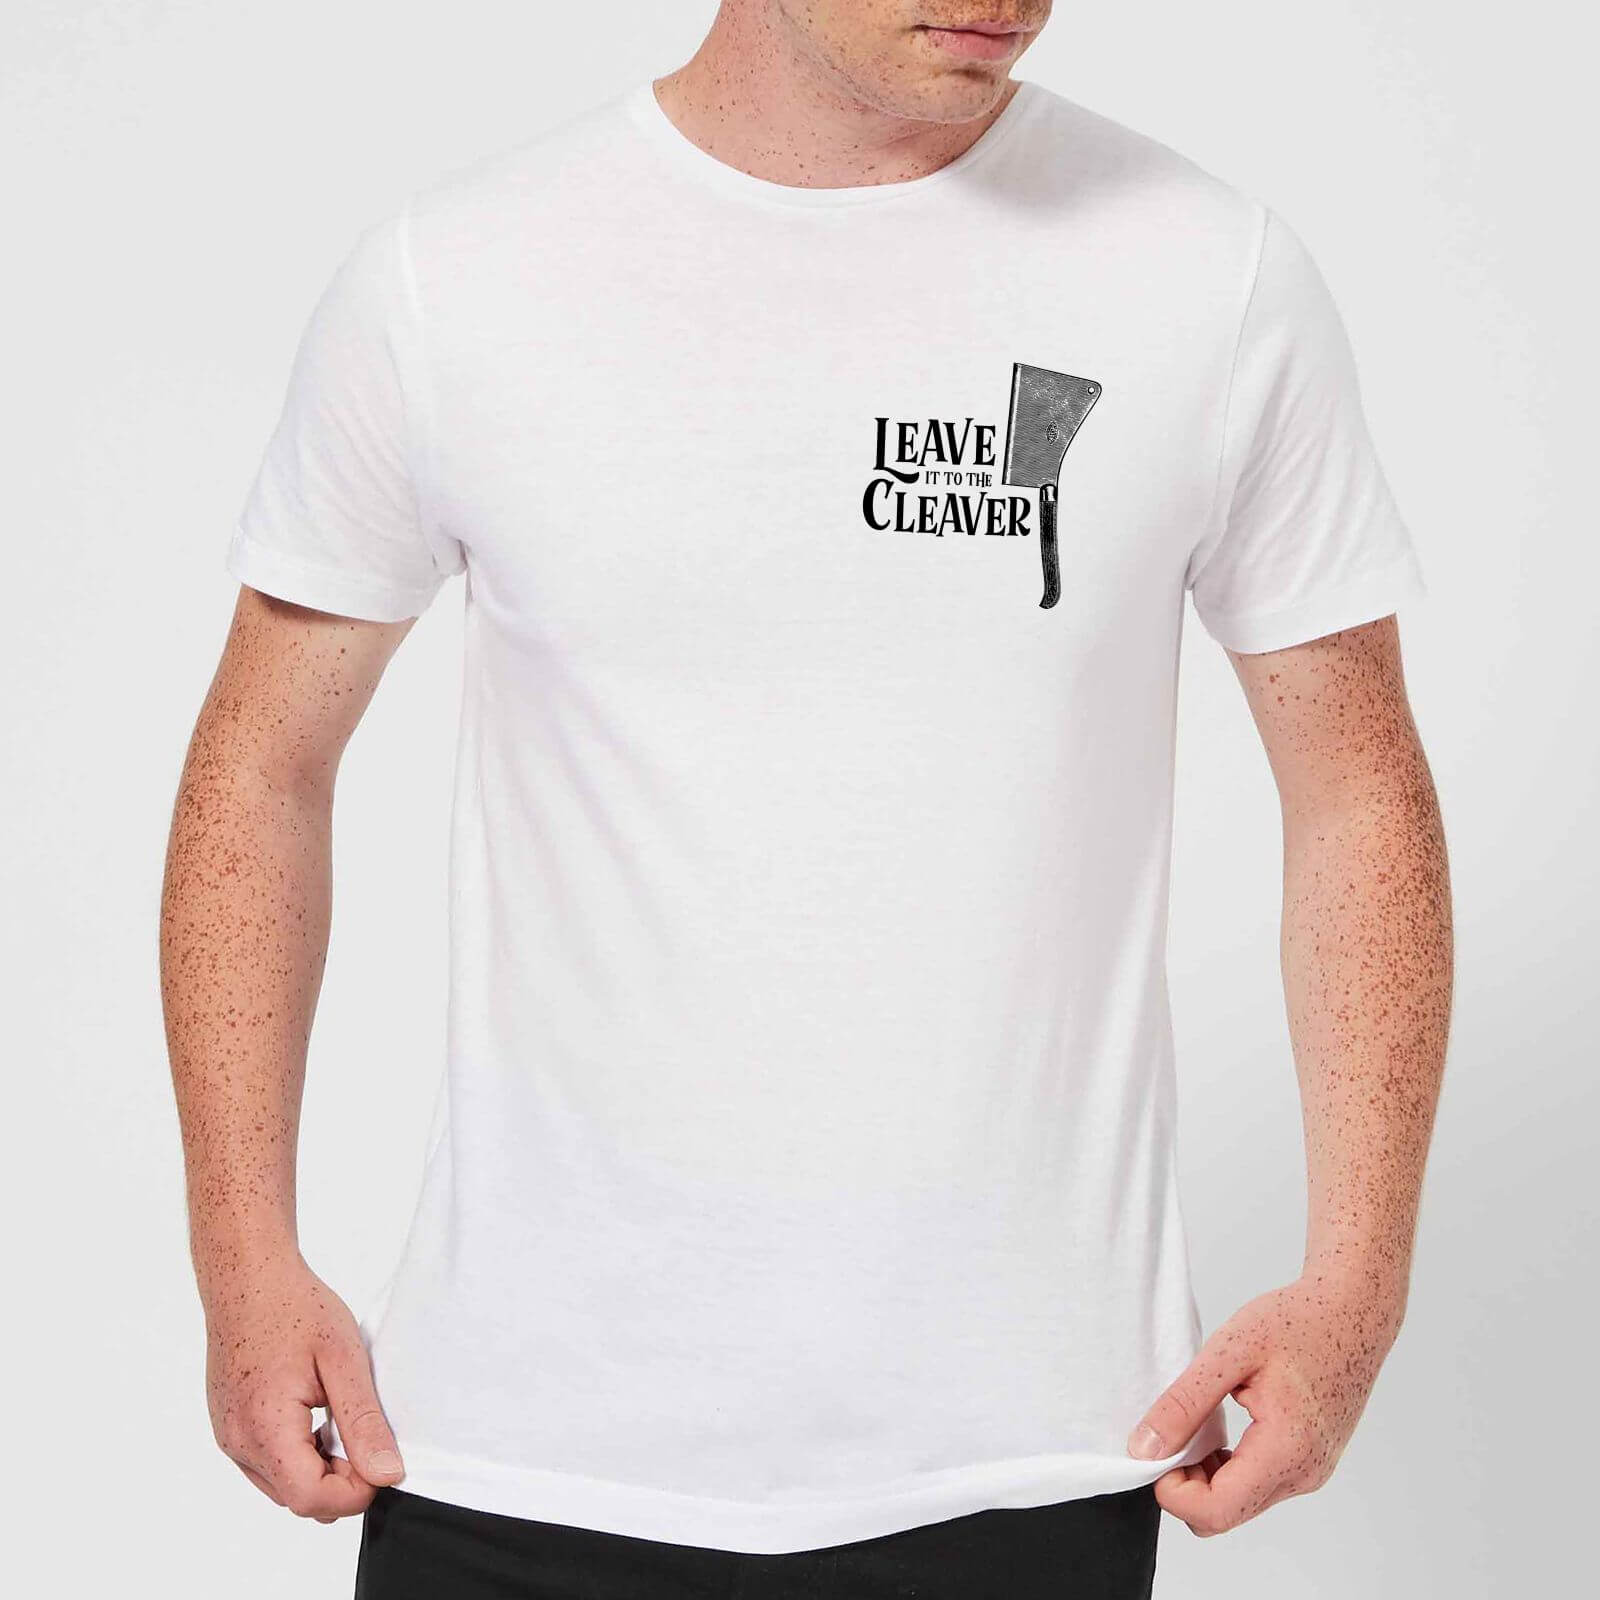 Leave It To The Cleaver T-Shirt - White - S - White